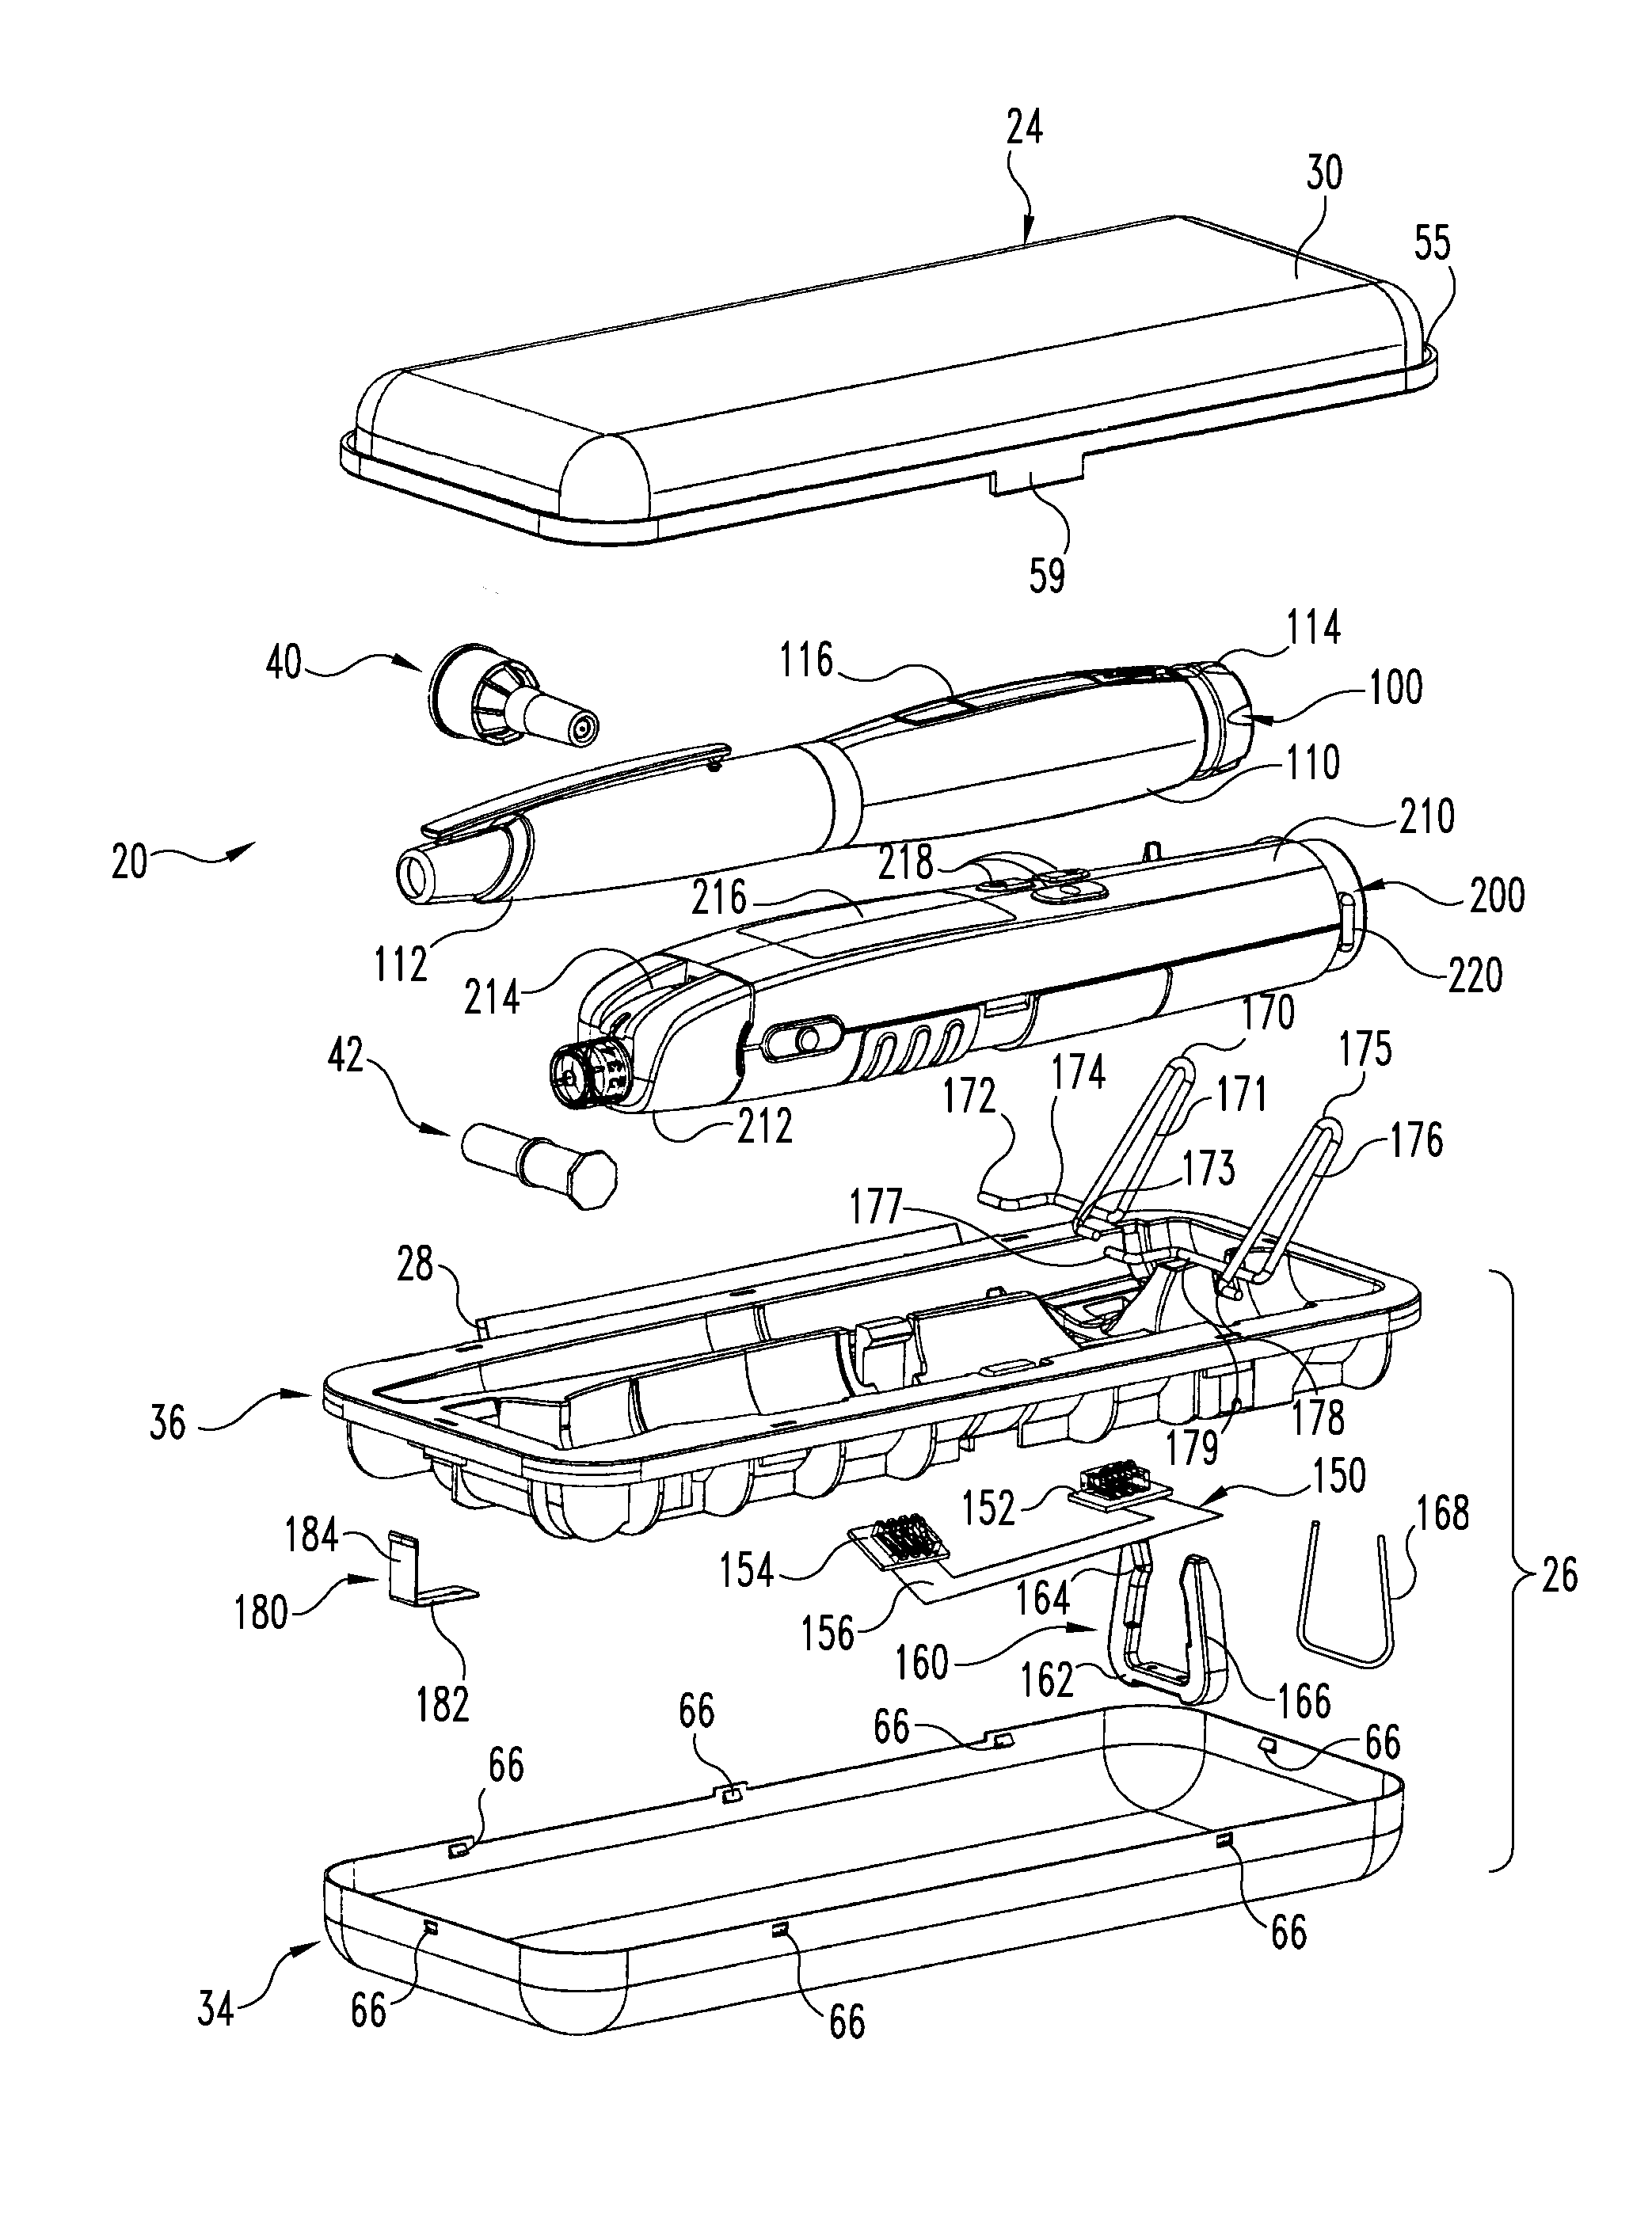 Systems and methods for administering a medical regimen